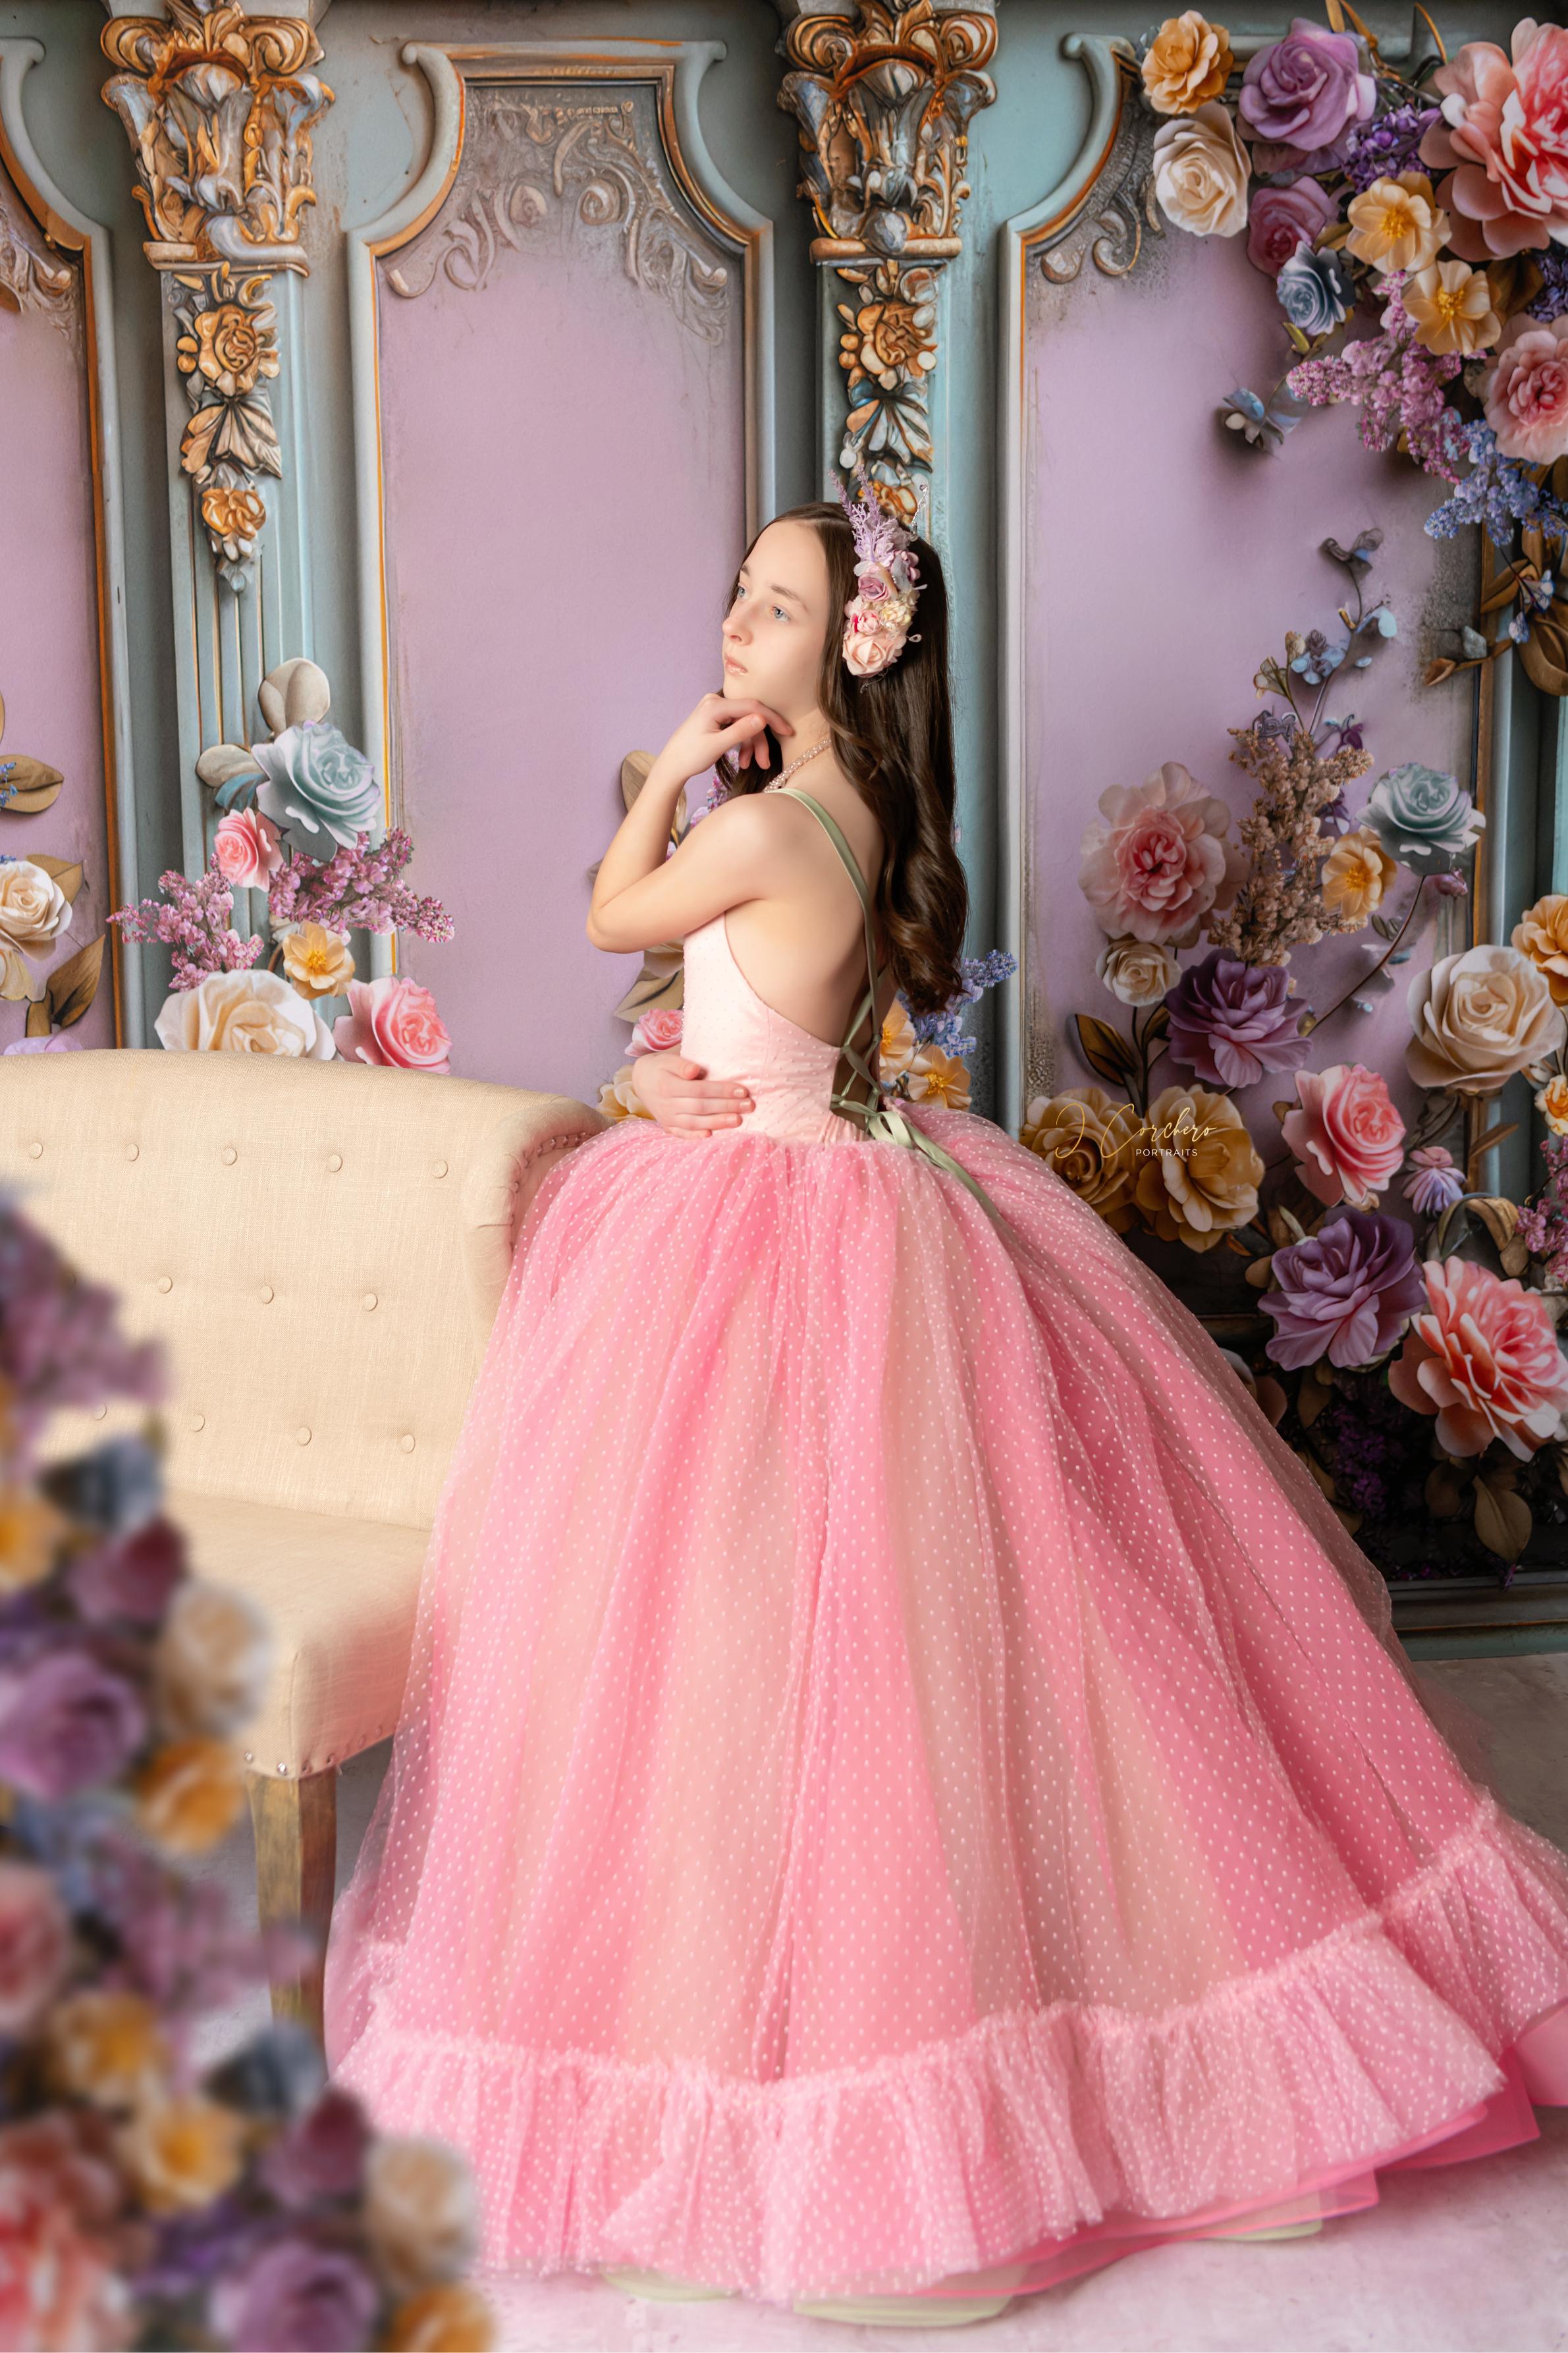 Couture Gowns For Spring - Teen Dream Sessions